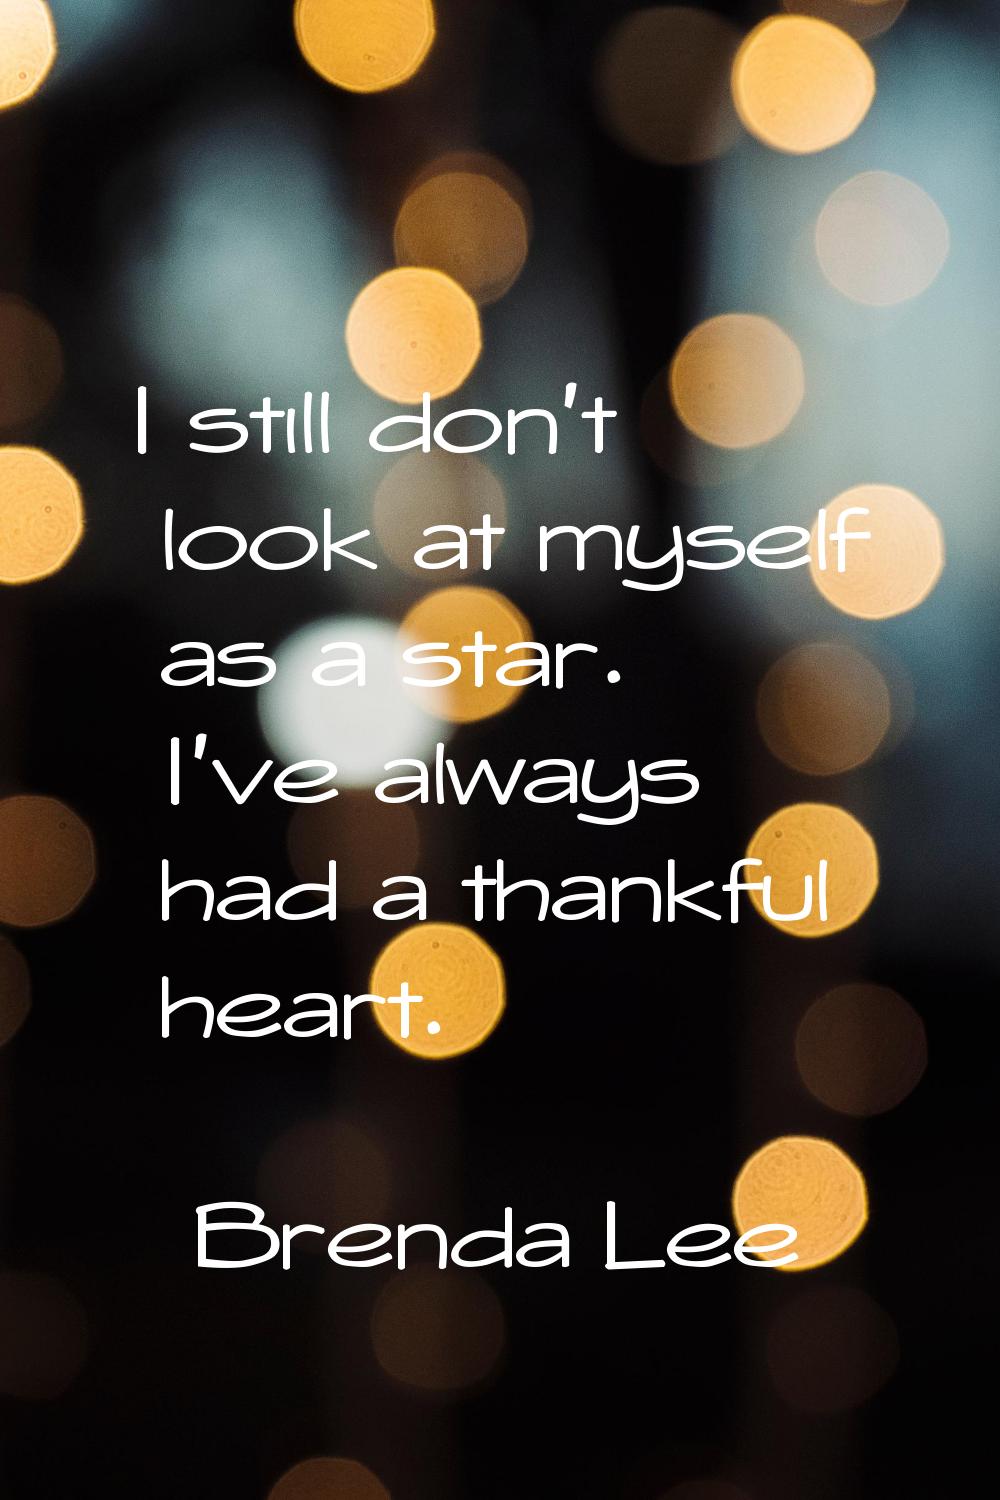 I still don't look at myself as a star. I've always had a thankful heart.